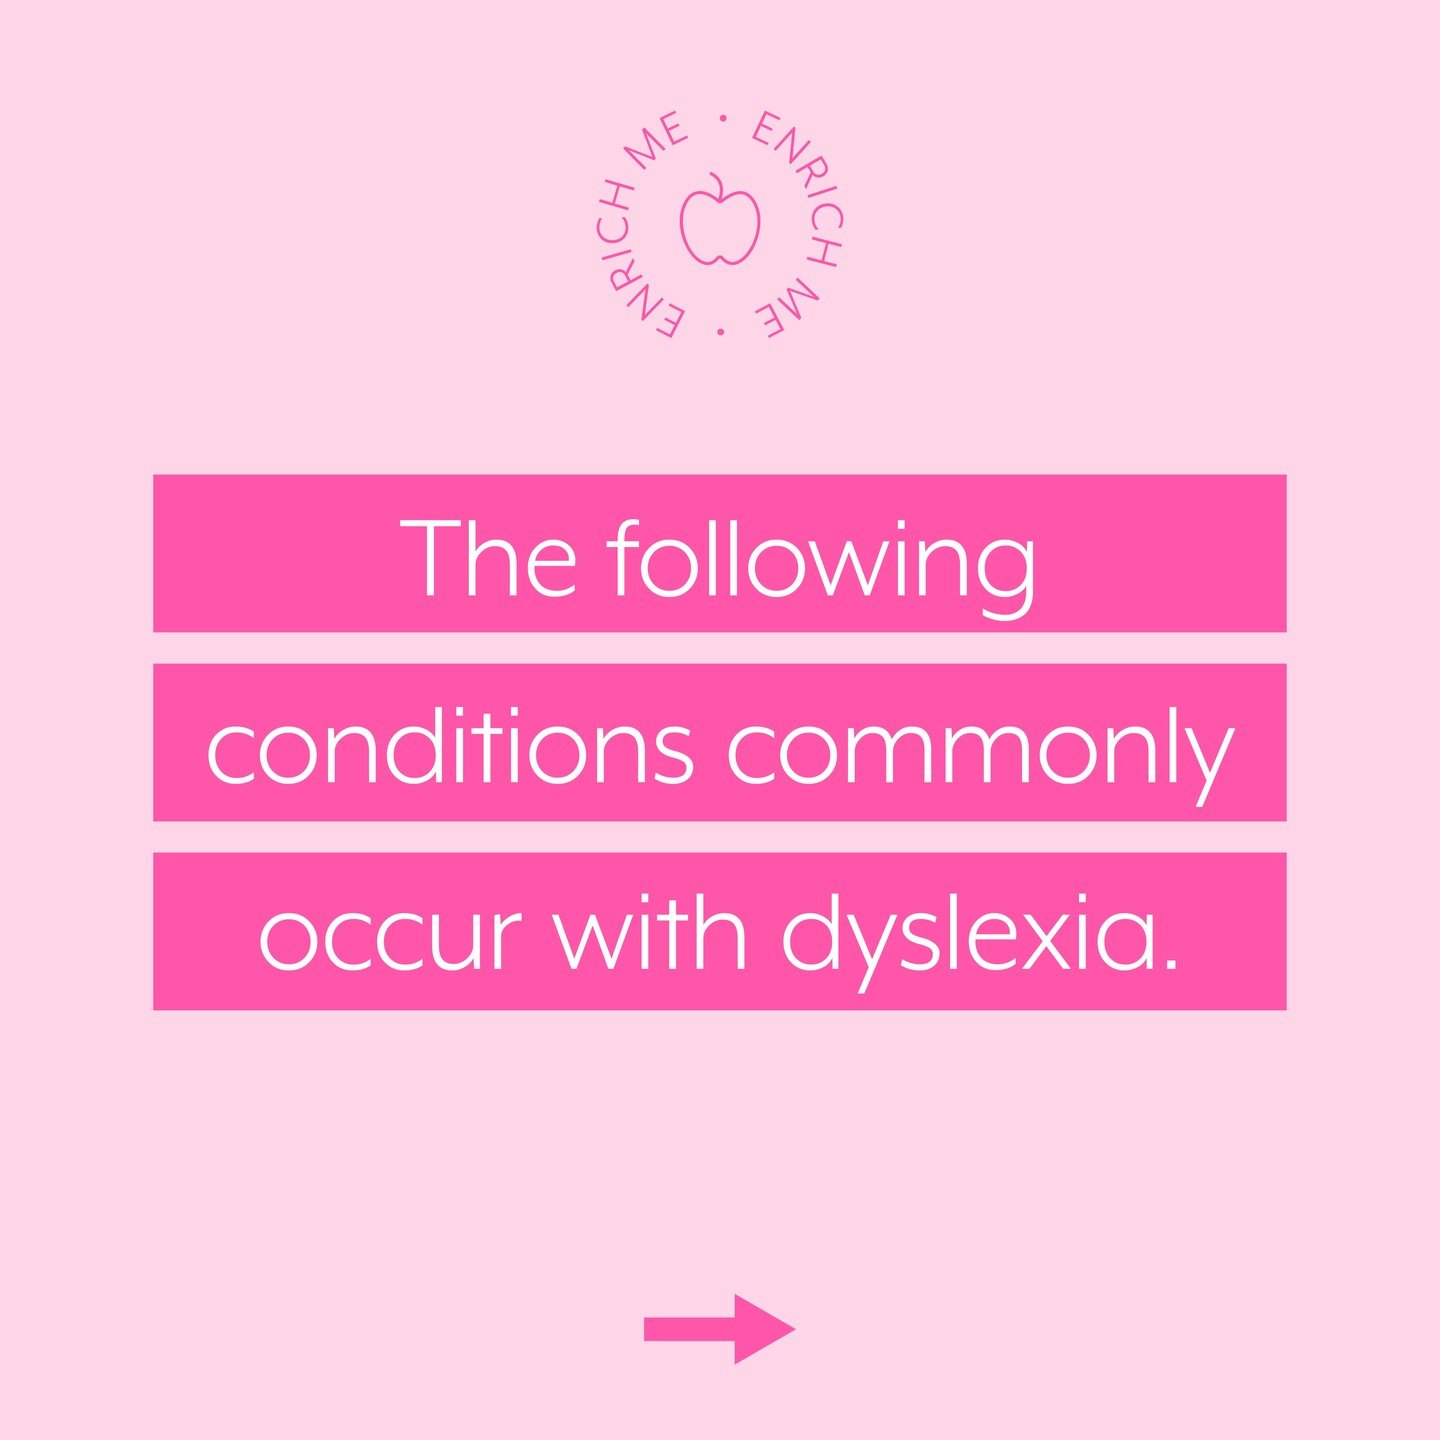 Parents, the good news is that early intervention and consistent support can ameliorate all of these conditions. 1 in 5 children show signs of dyslexia, they require specific phonics-based instruction in order to learn to read, write and spell profic